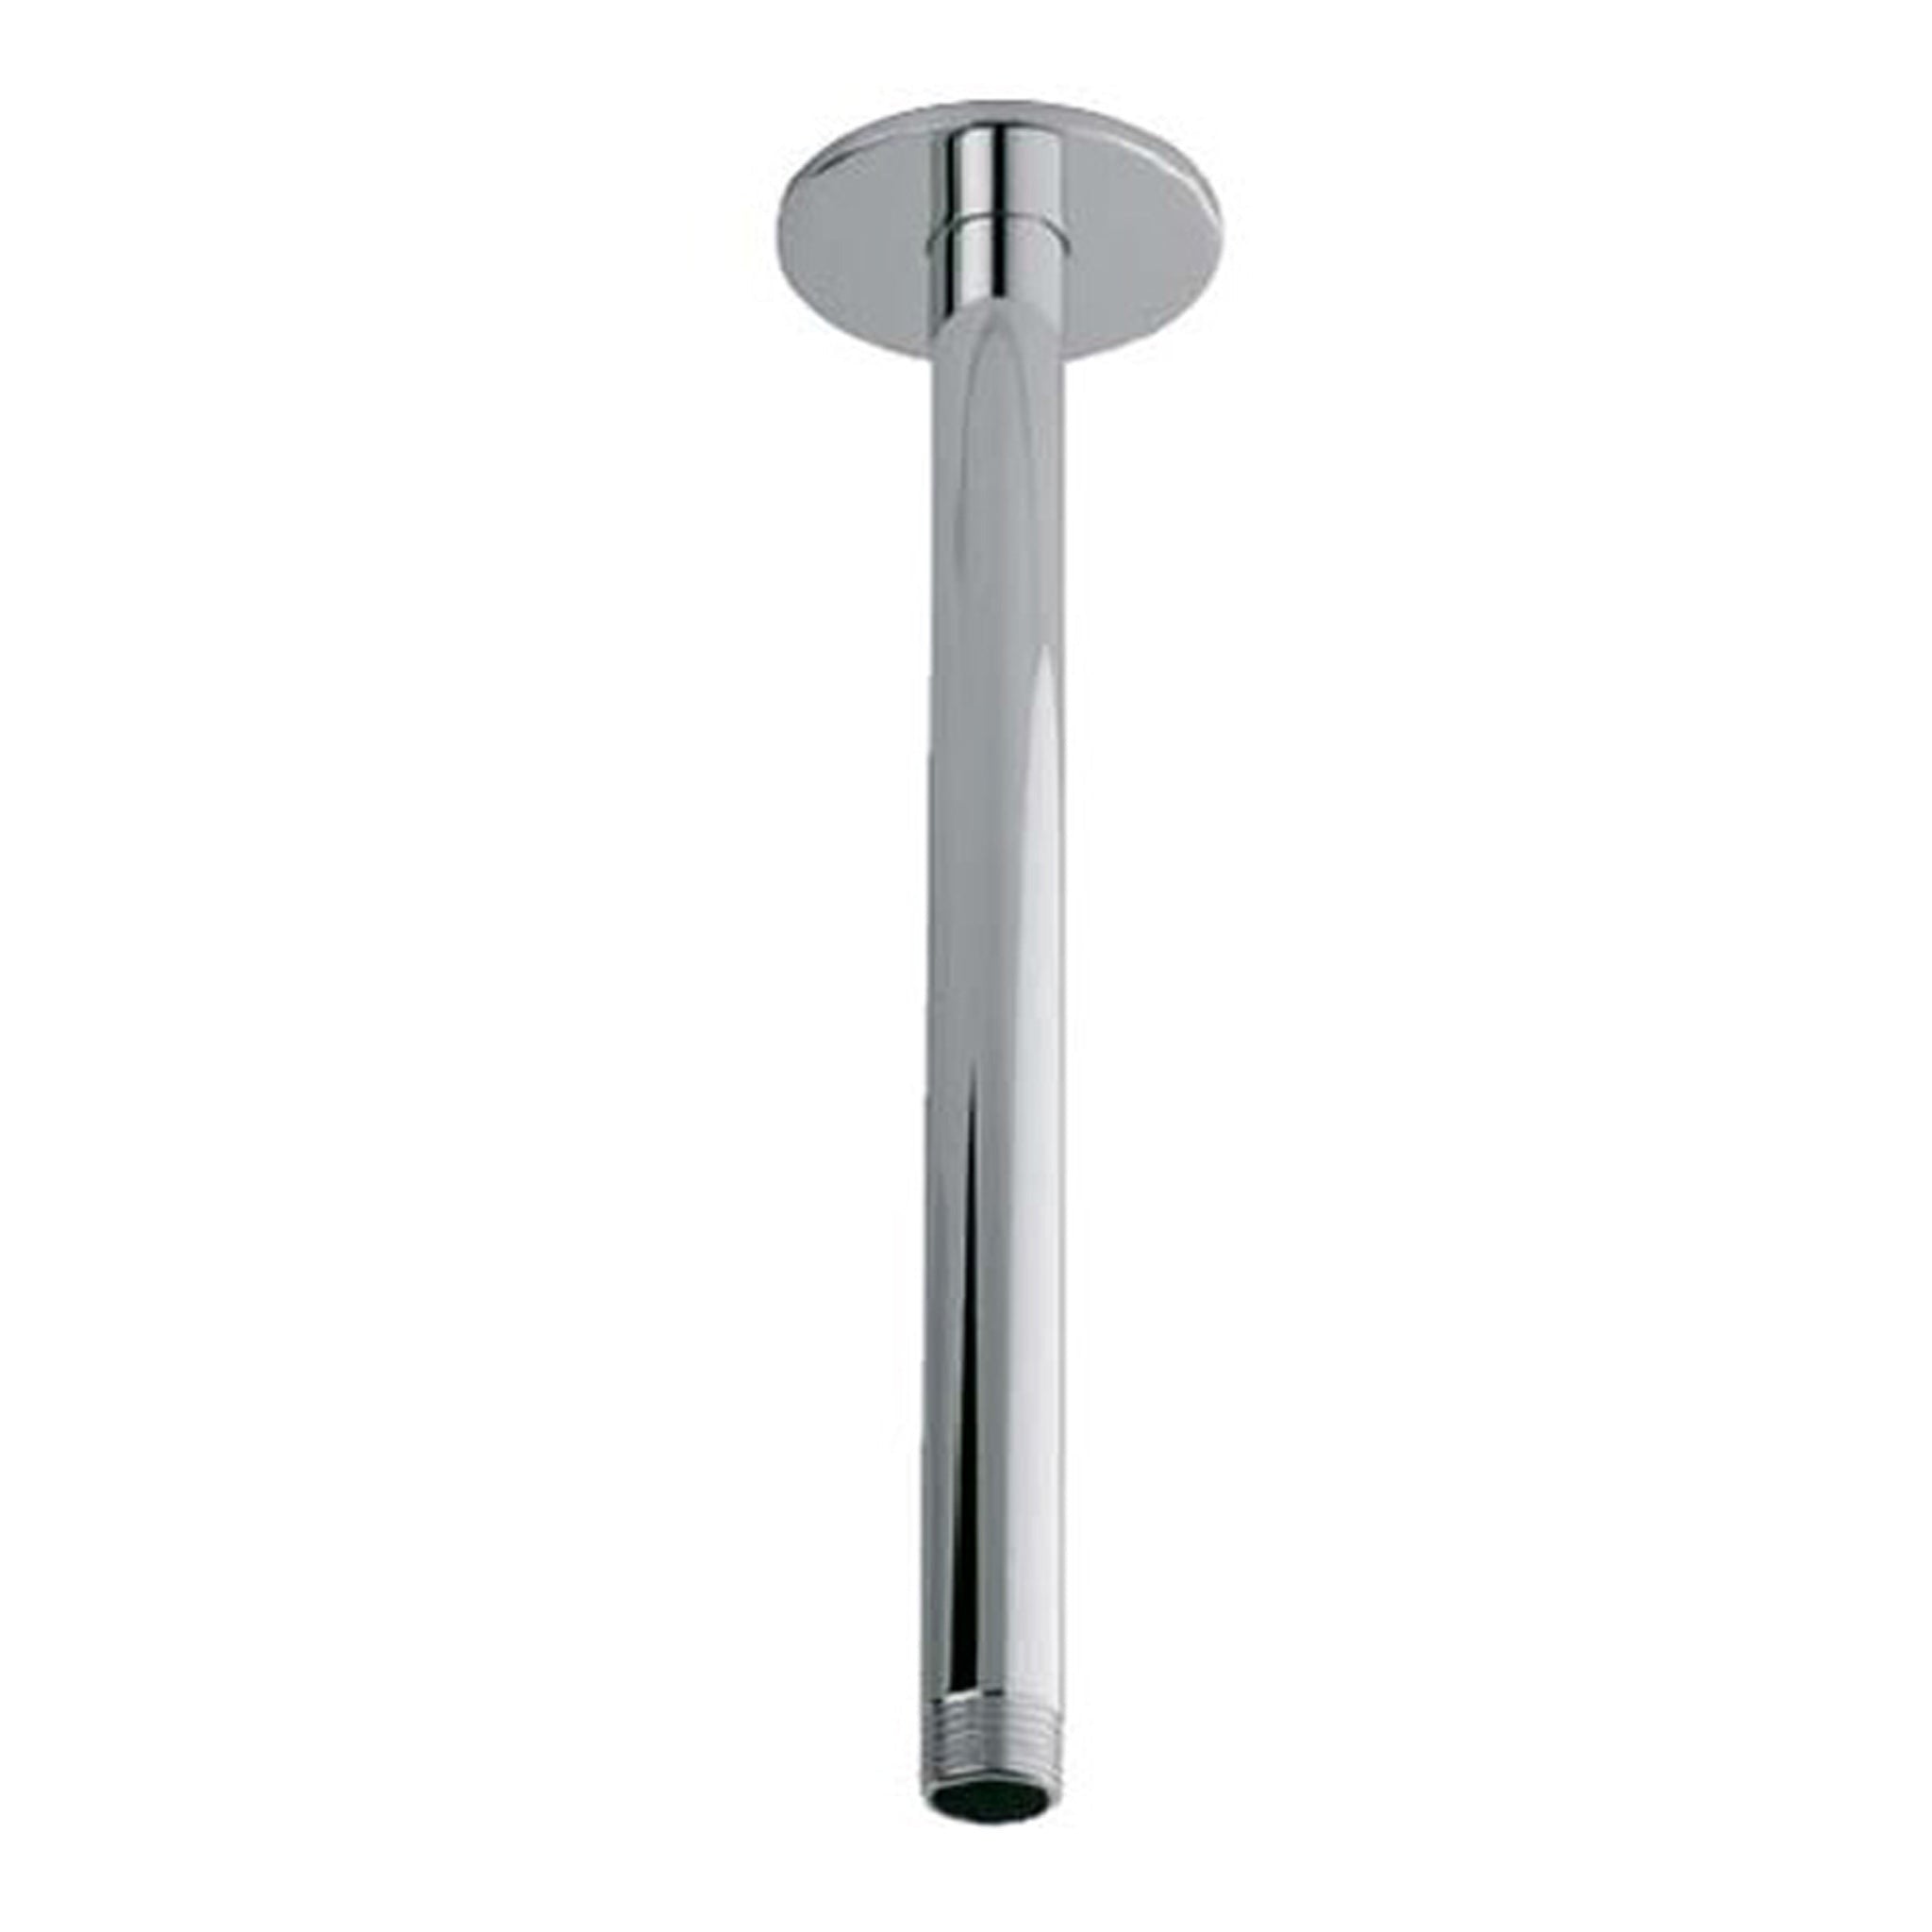 Aquamoon 4" Shower arm Ceiling Round Chrome with Flange